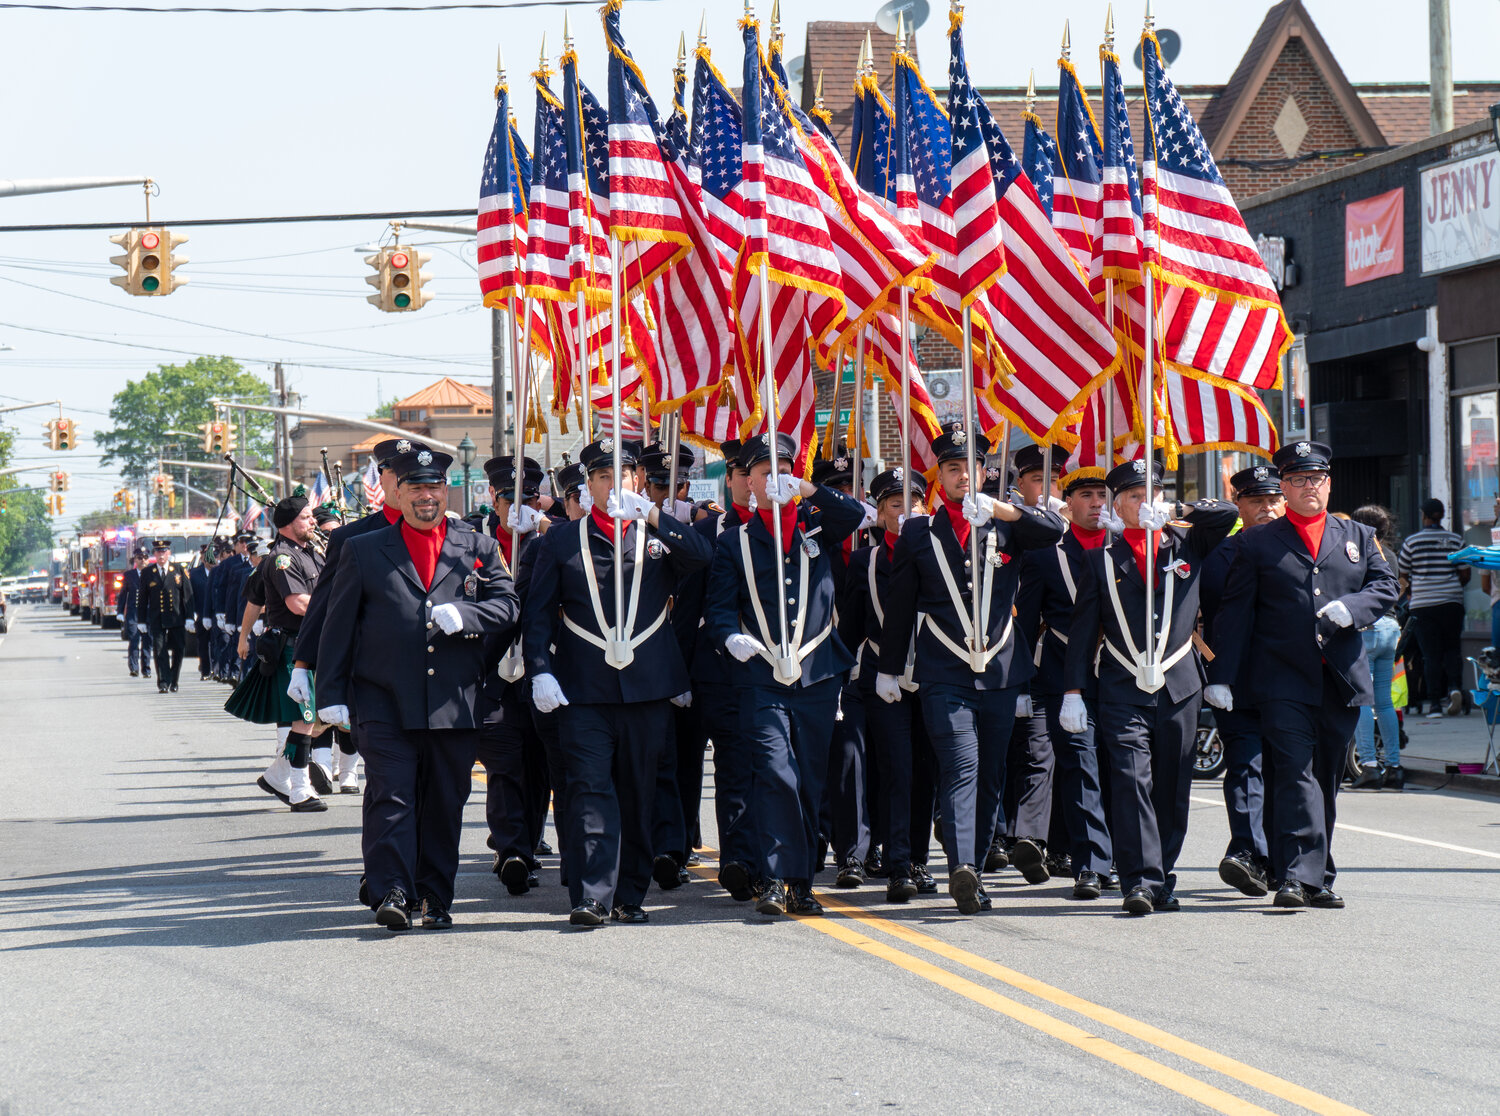 The Valley Stream Fire Department proudly shows off its colors during the Memorial Day parade on May 29.